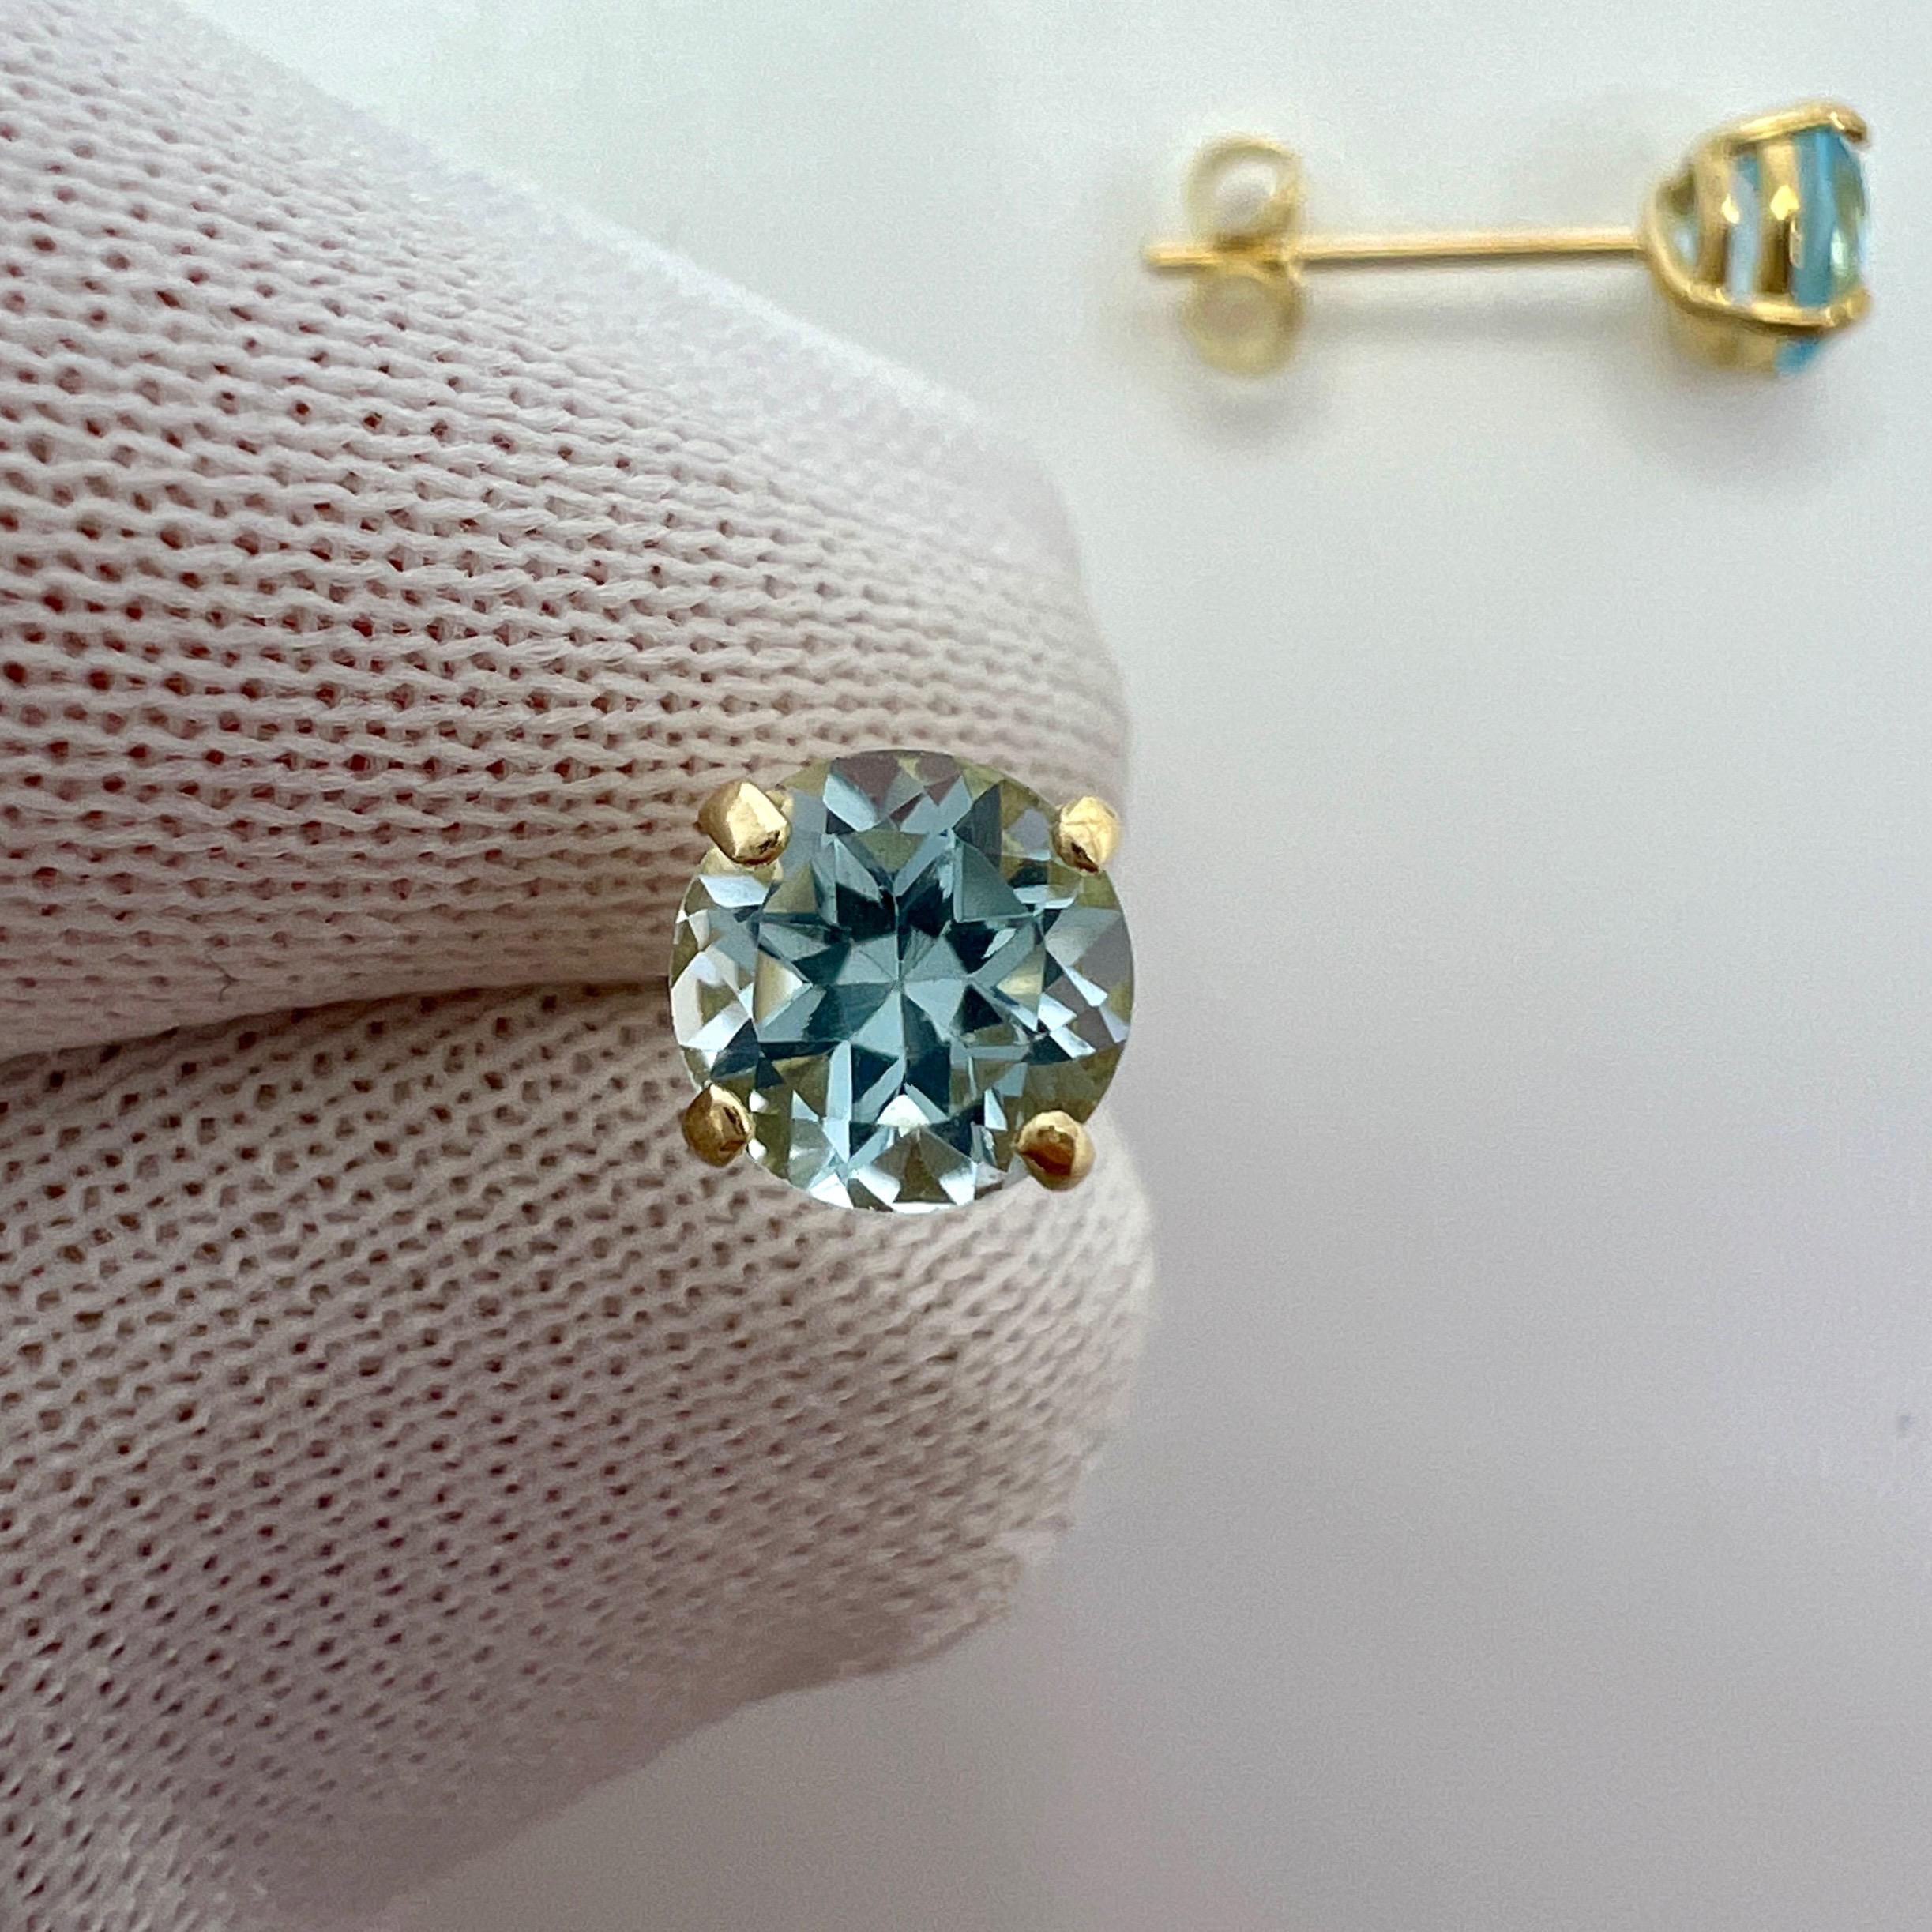 Taille ronde Nature 1.15ct Vivid Sky Blue Topaz Round Cut Yellow Gold 9k Stud Earrings en vente